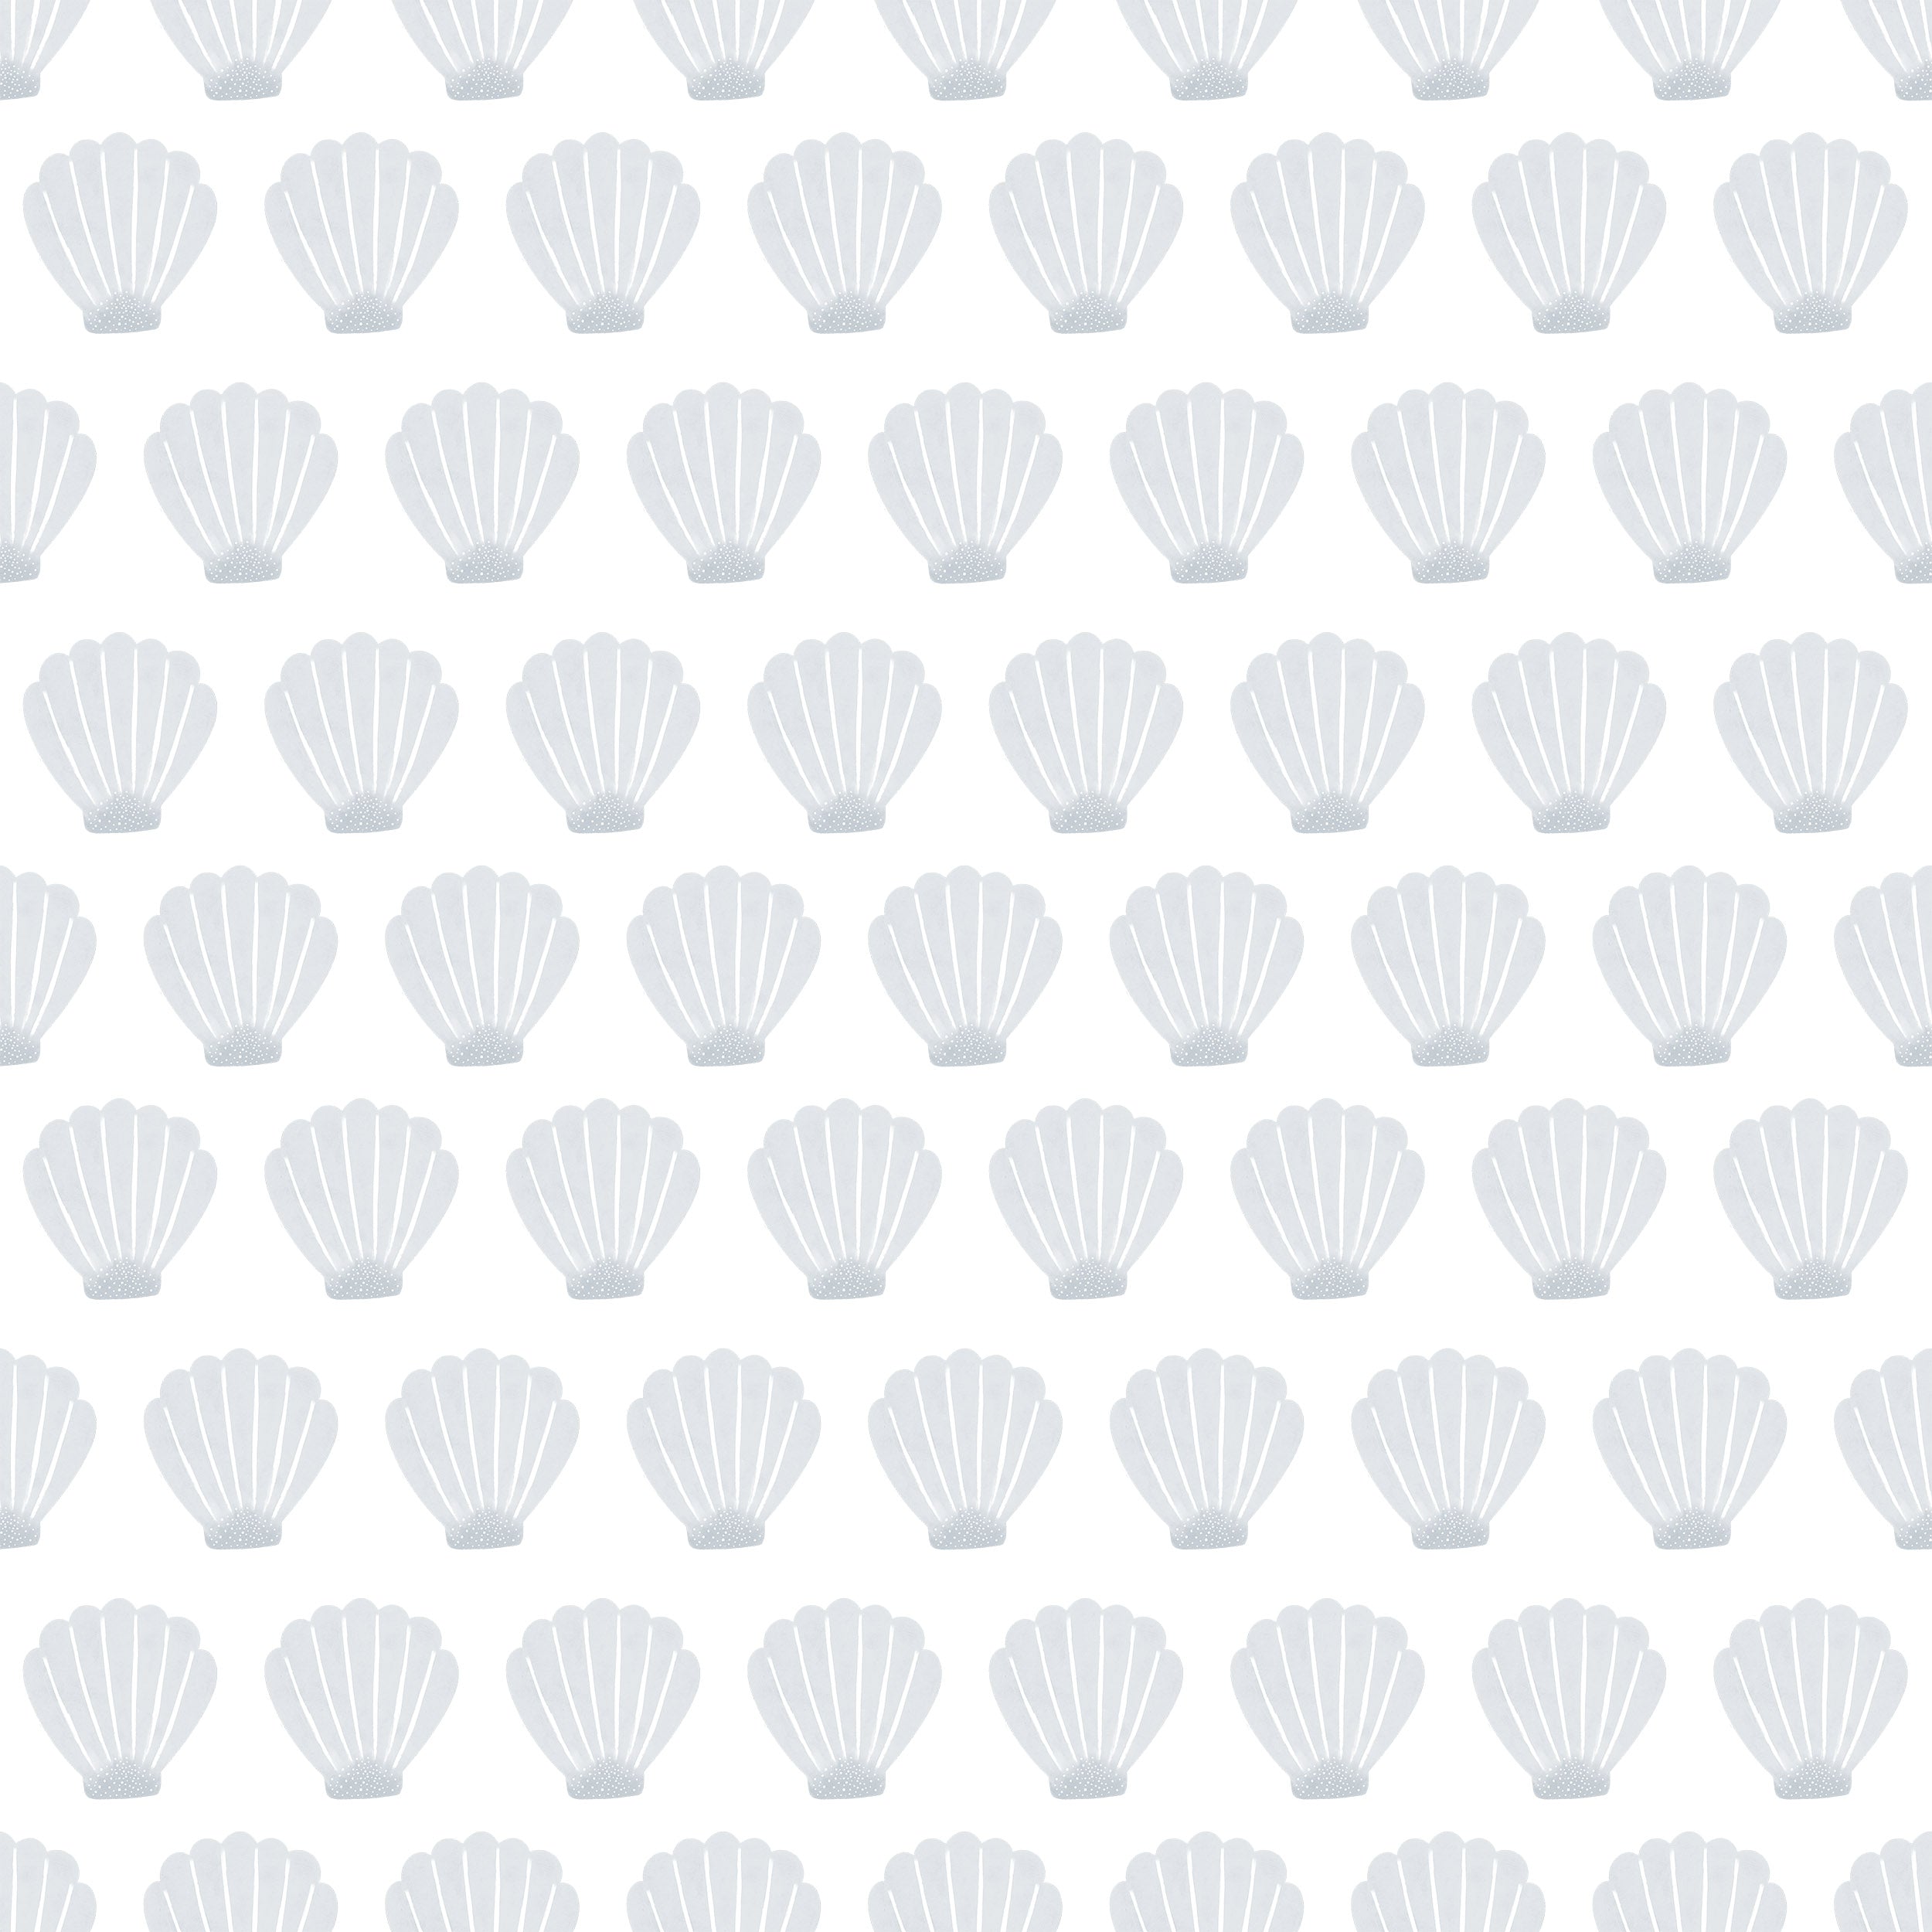 Close-up of a seamless wallpaper pattern displaying light gray scallop shells evenly distributed on a plain white background. The design is simple and stylized, suitable for a subtle oceanic theme in an interior space.